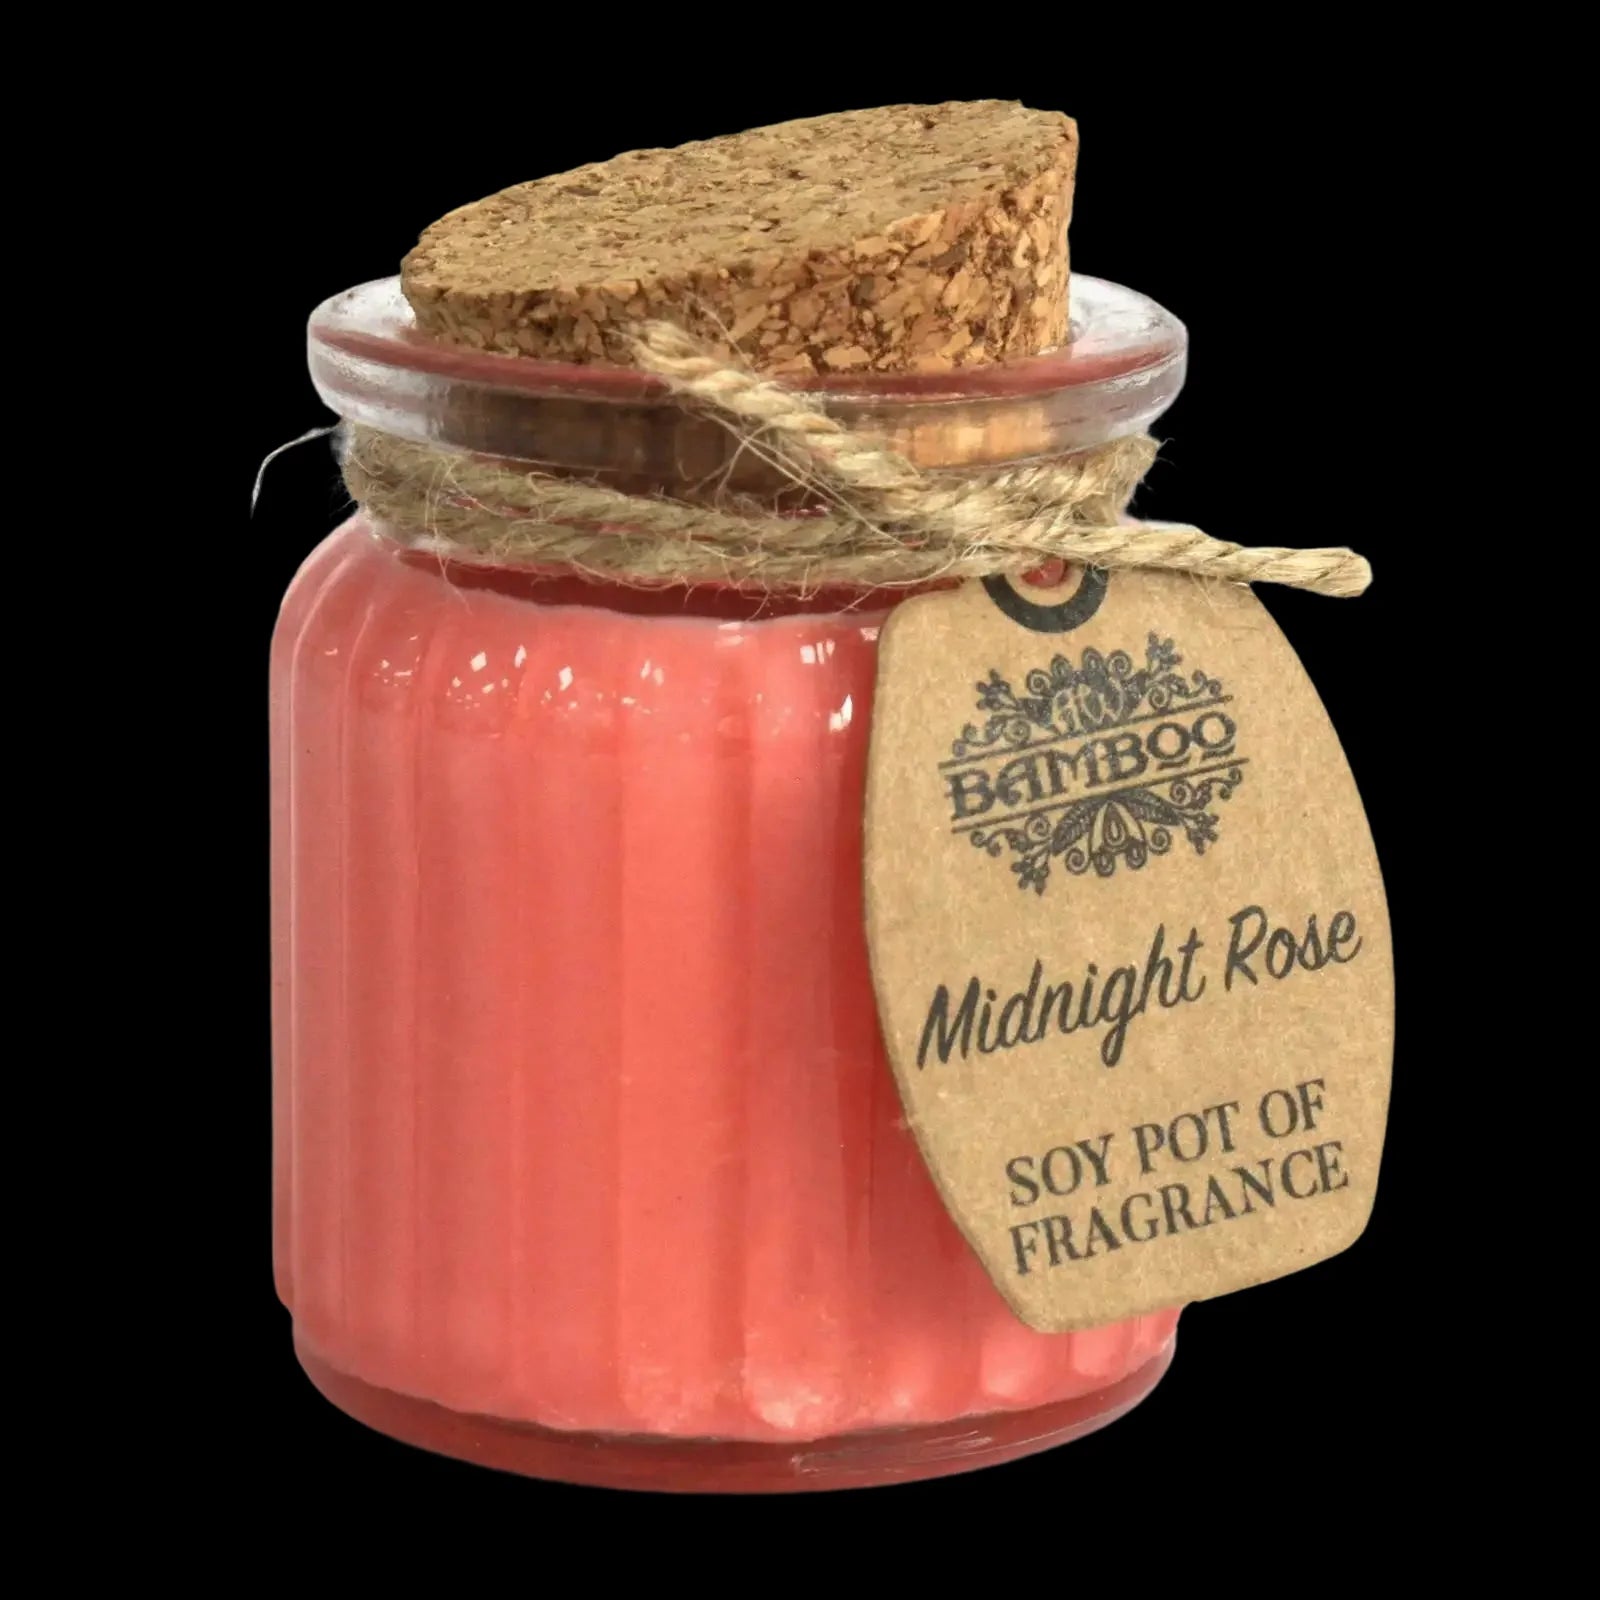 Midnight Rose Soy Pot Of Fragrance Candles - Ancient Wisdom